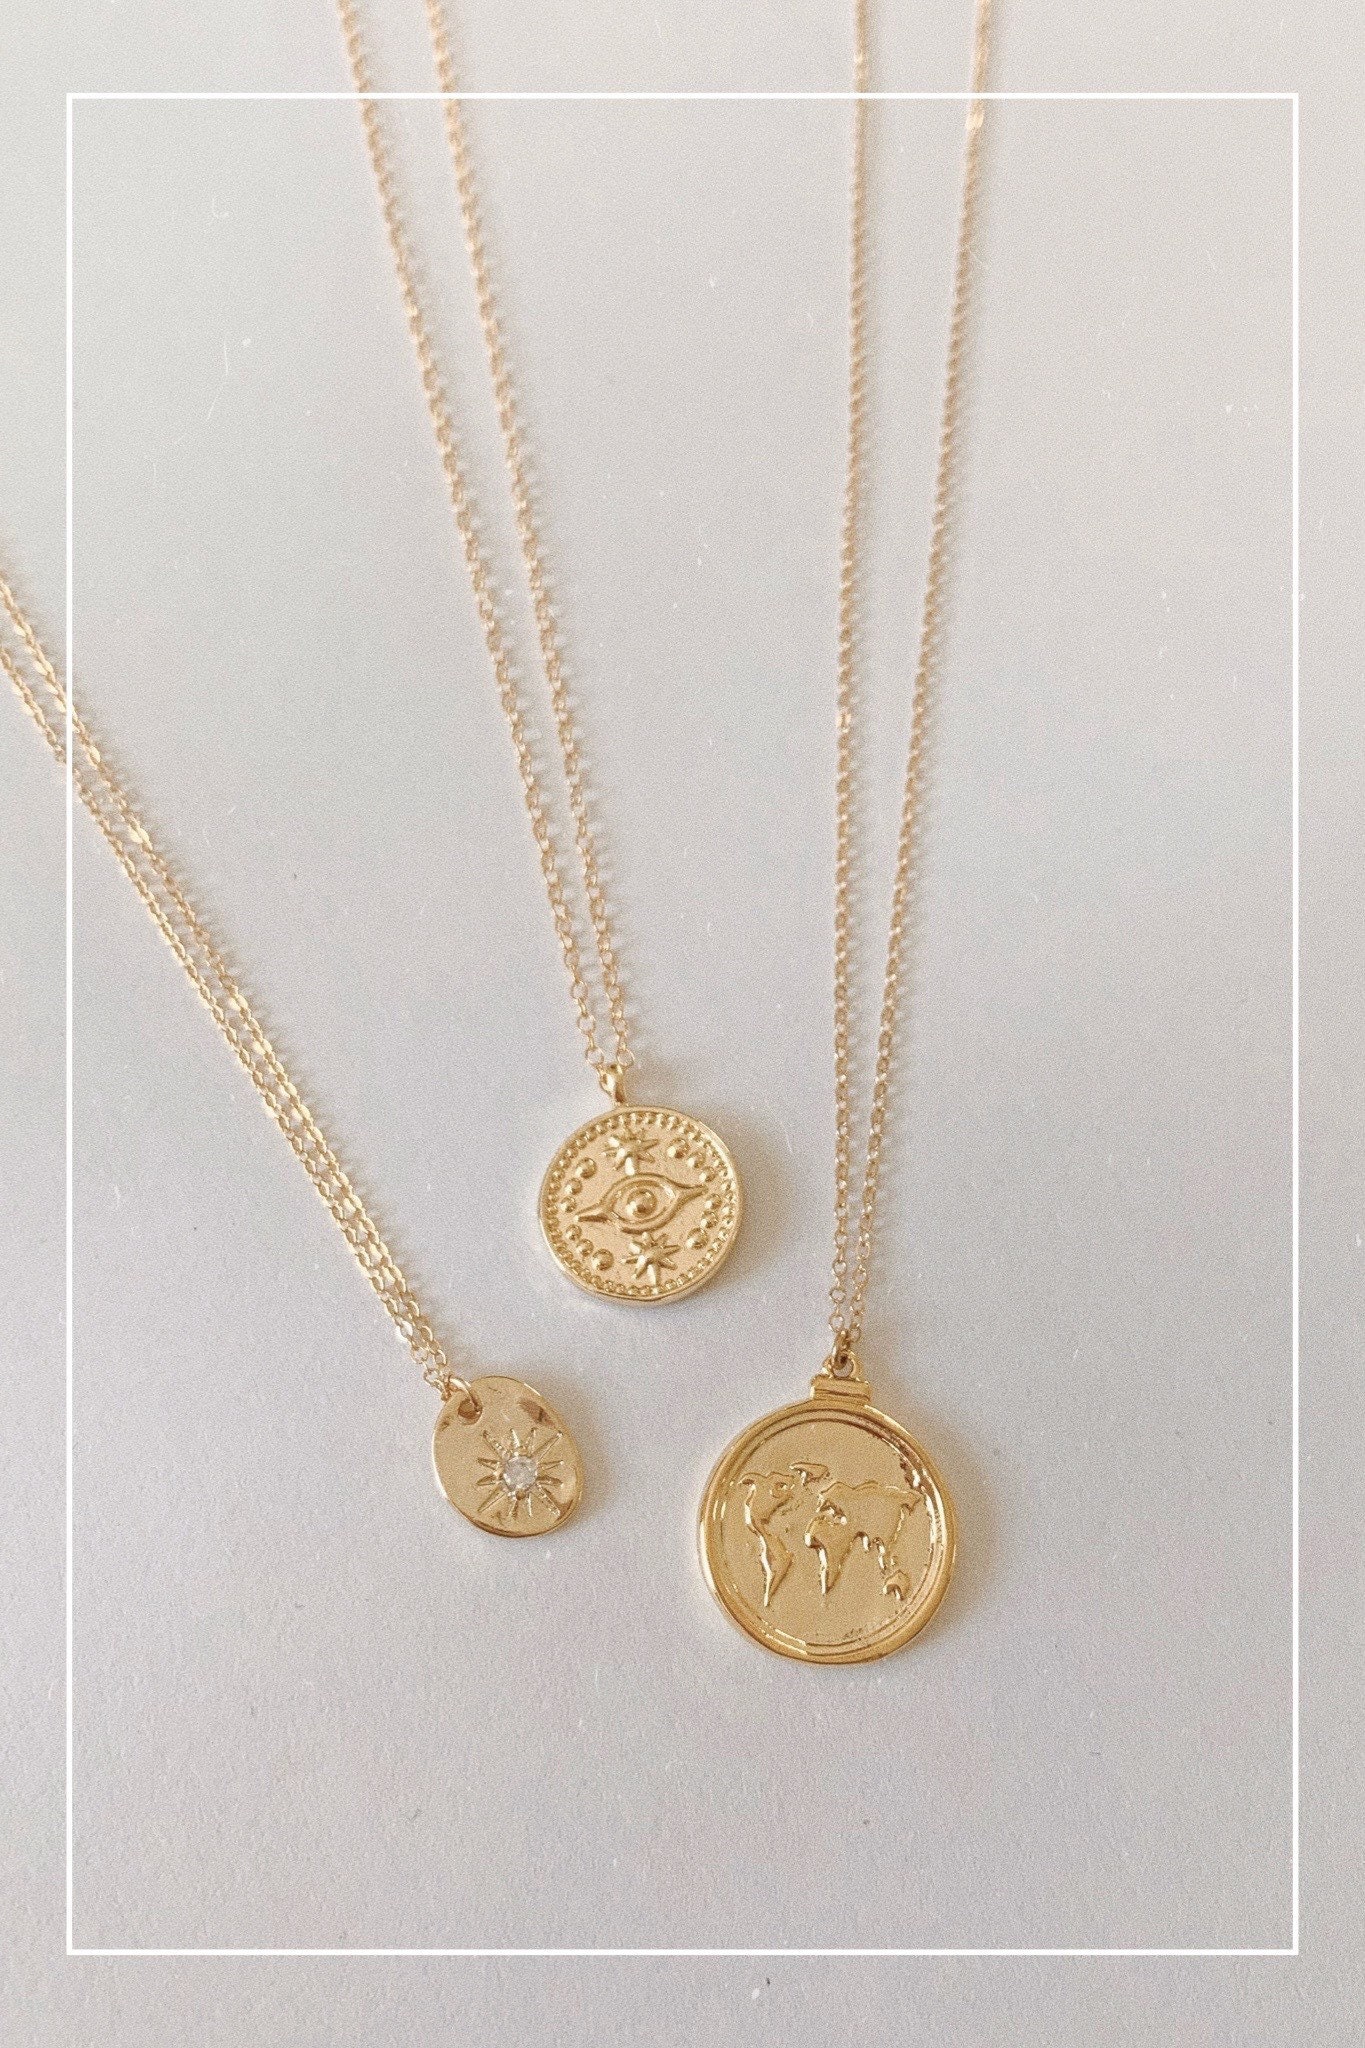 Evil Eye Necklace Gold Filled Necklace Layering Gold Coin | Etsy